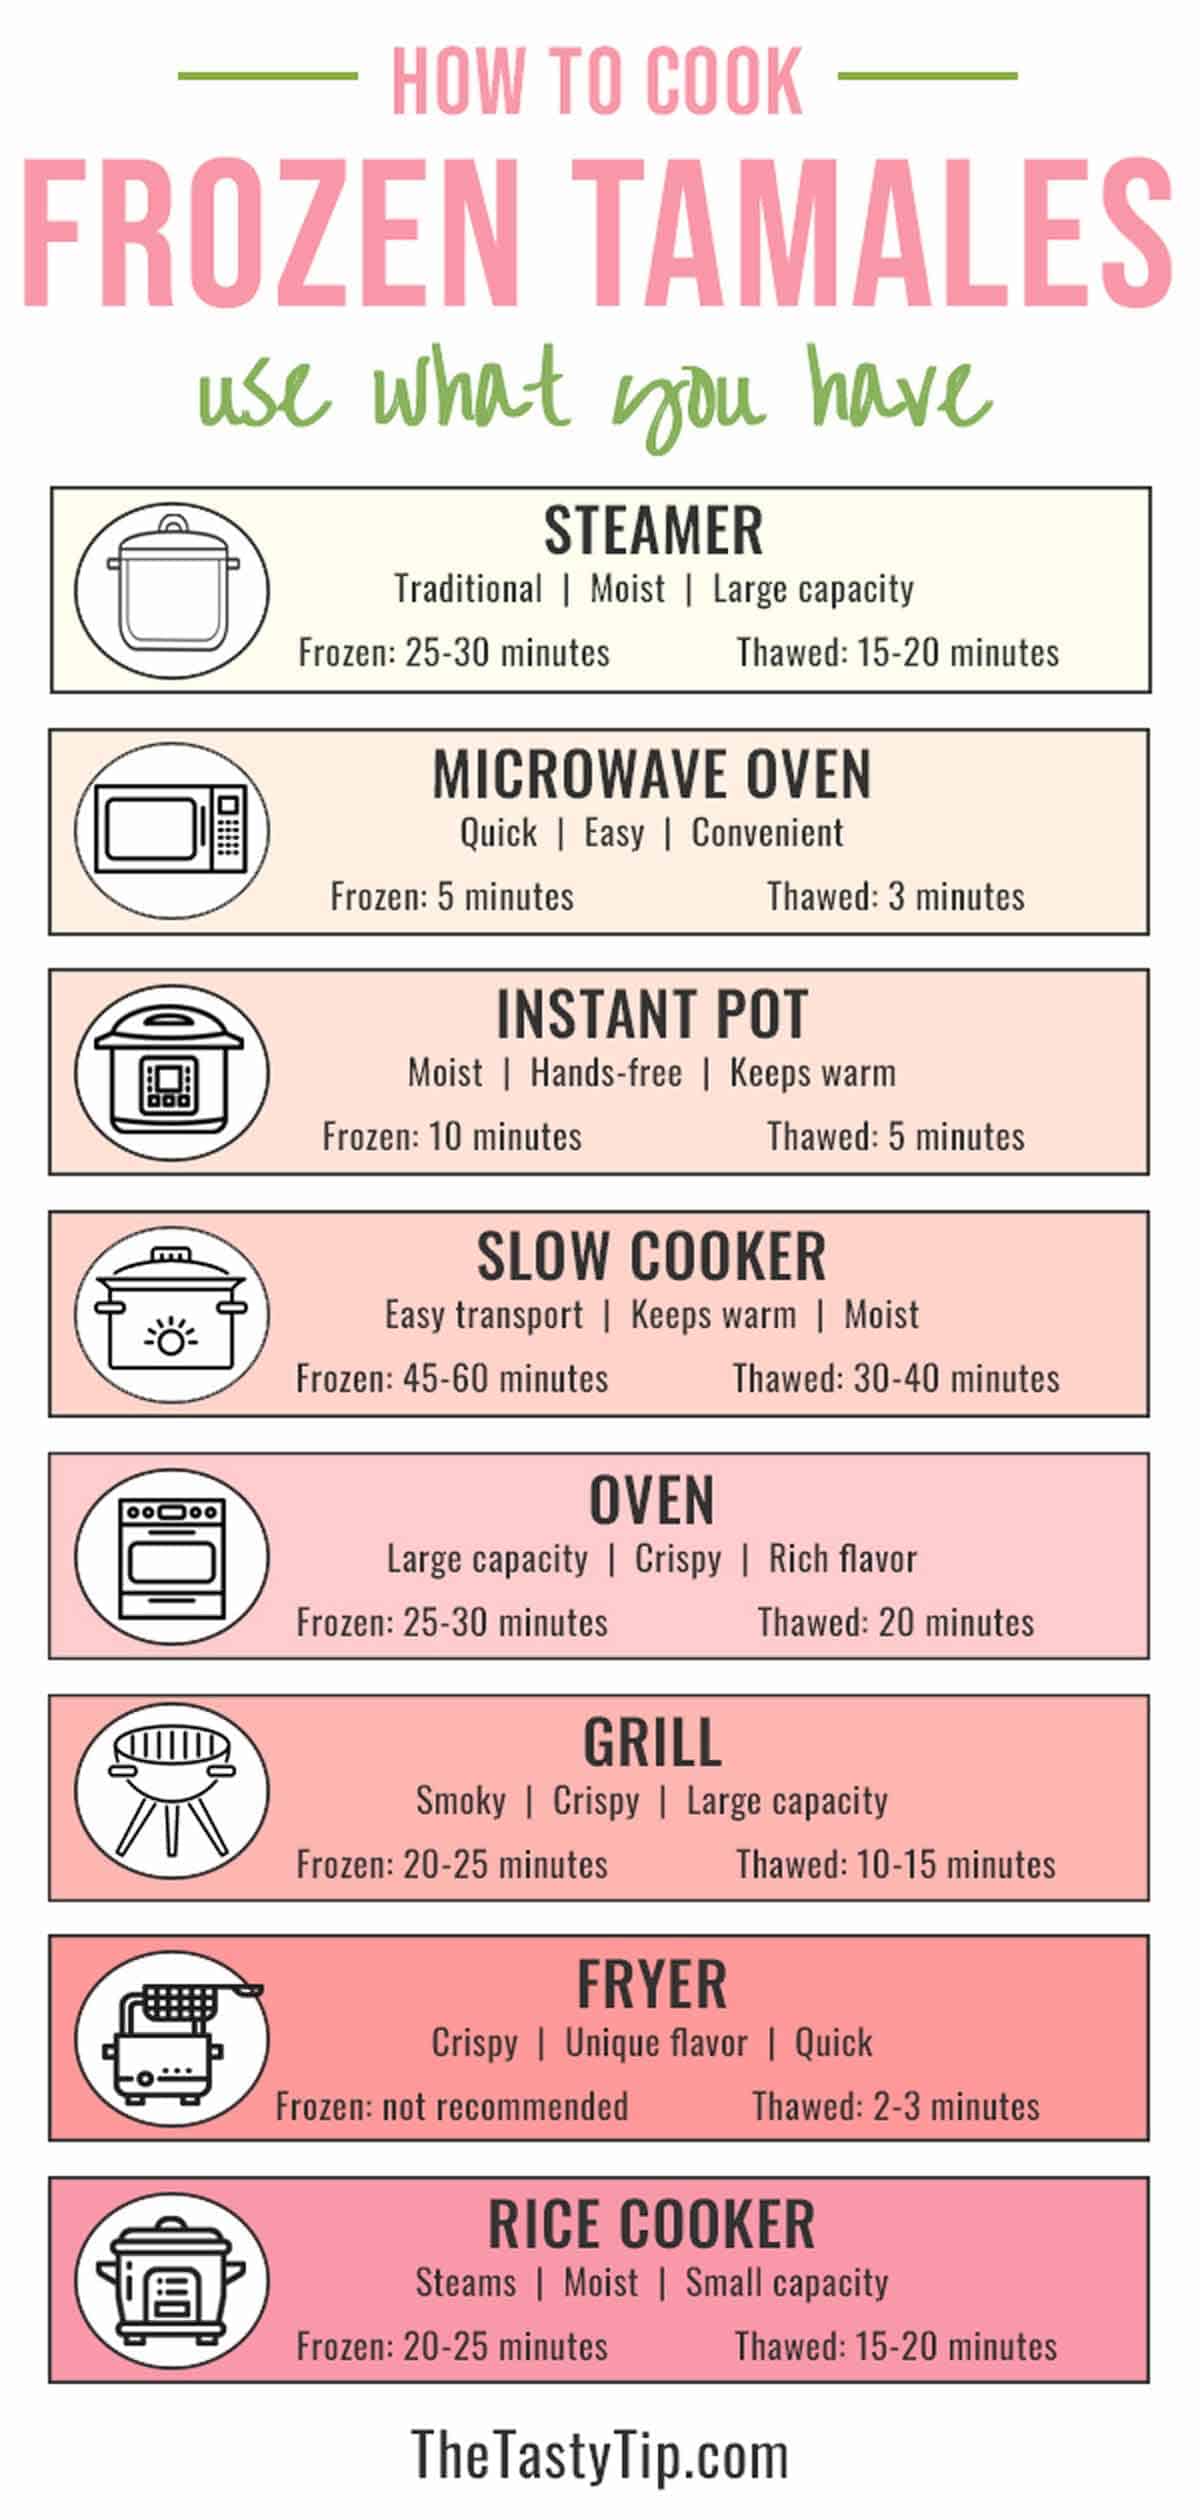 Infographic showing different methods to cook frozen tamales with their cooking times.